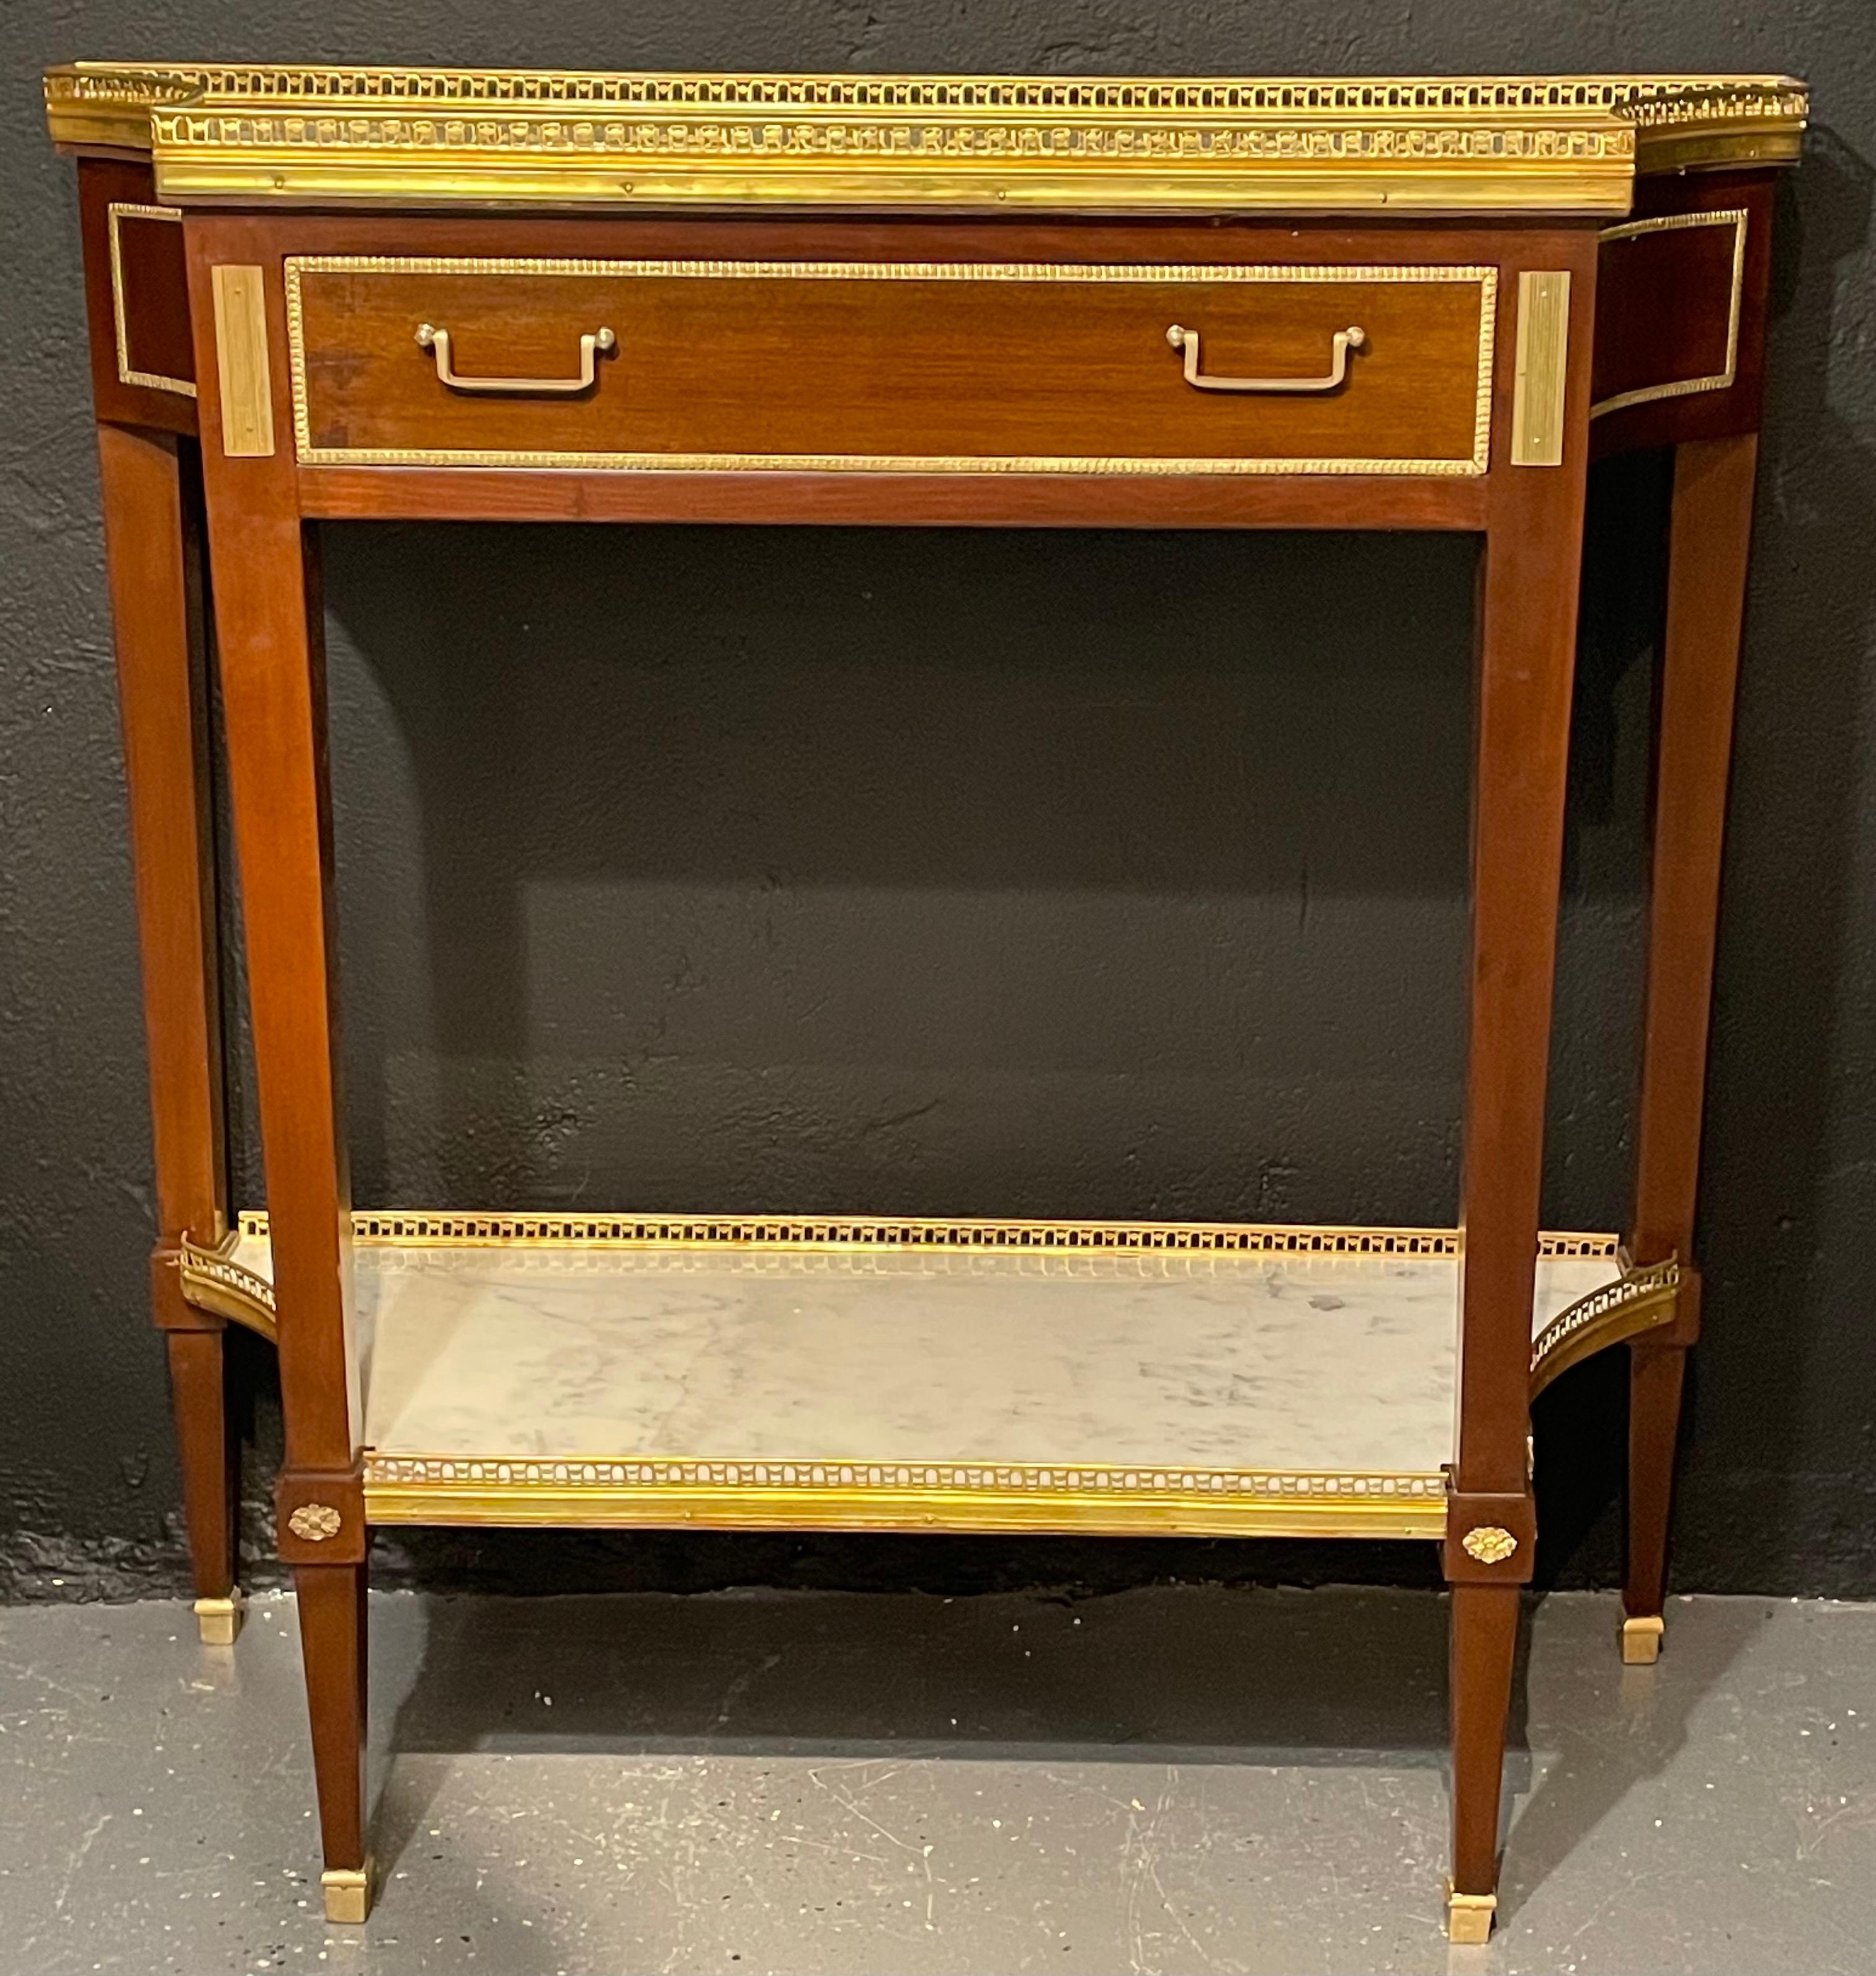 A pair of Russian style console tables having the Maison Jansen look and flair for design. This finely crafted and design pair of console, serving or sofa tables have inverted sides sporting a pierced bronze gallery framing a white and gray veined